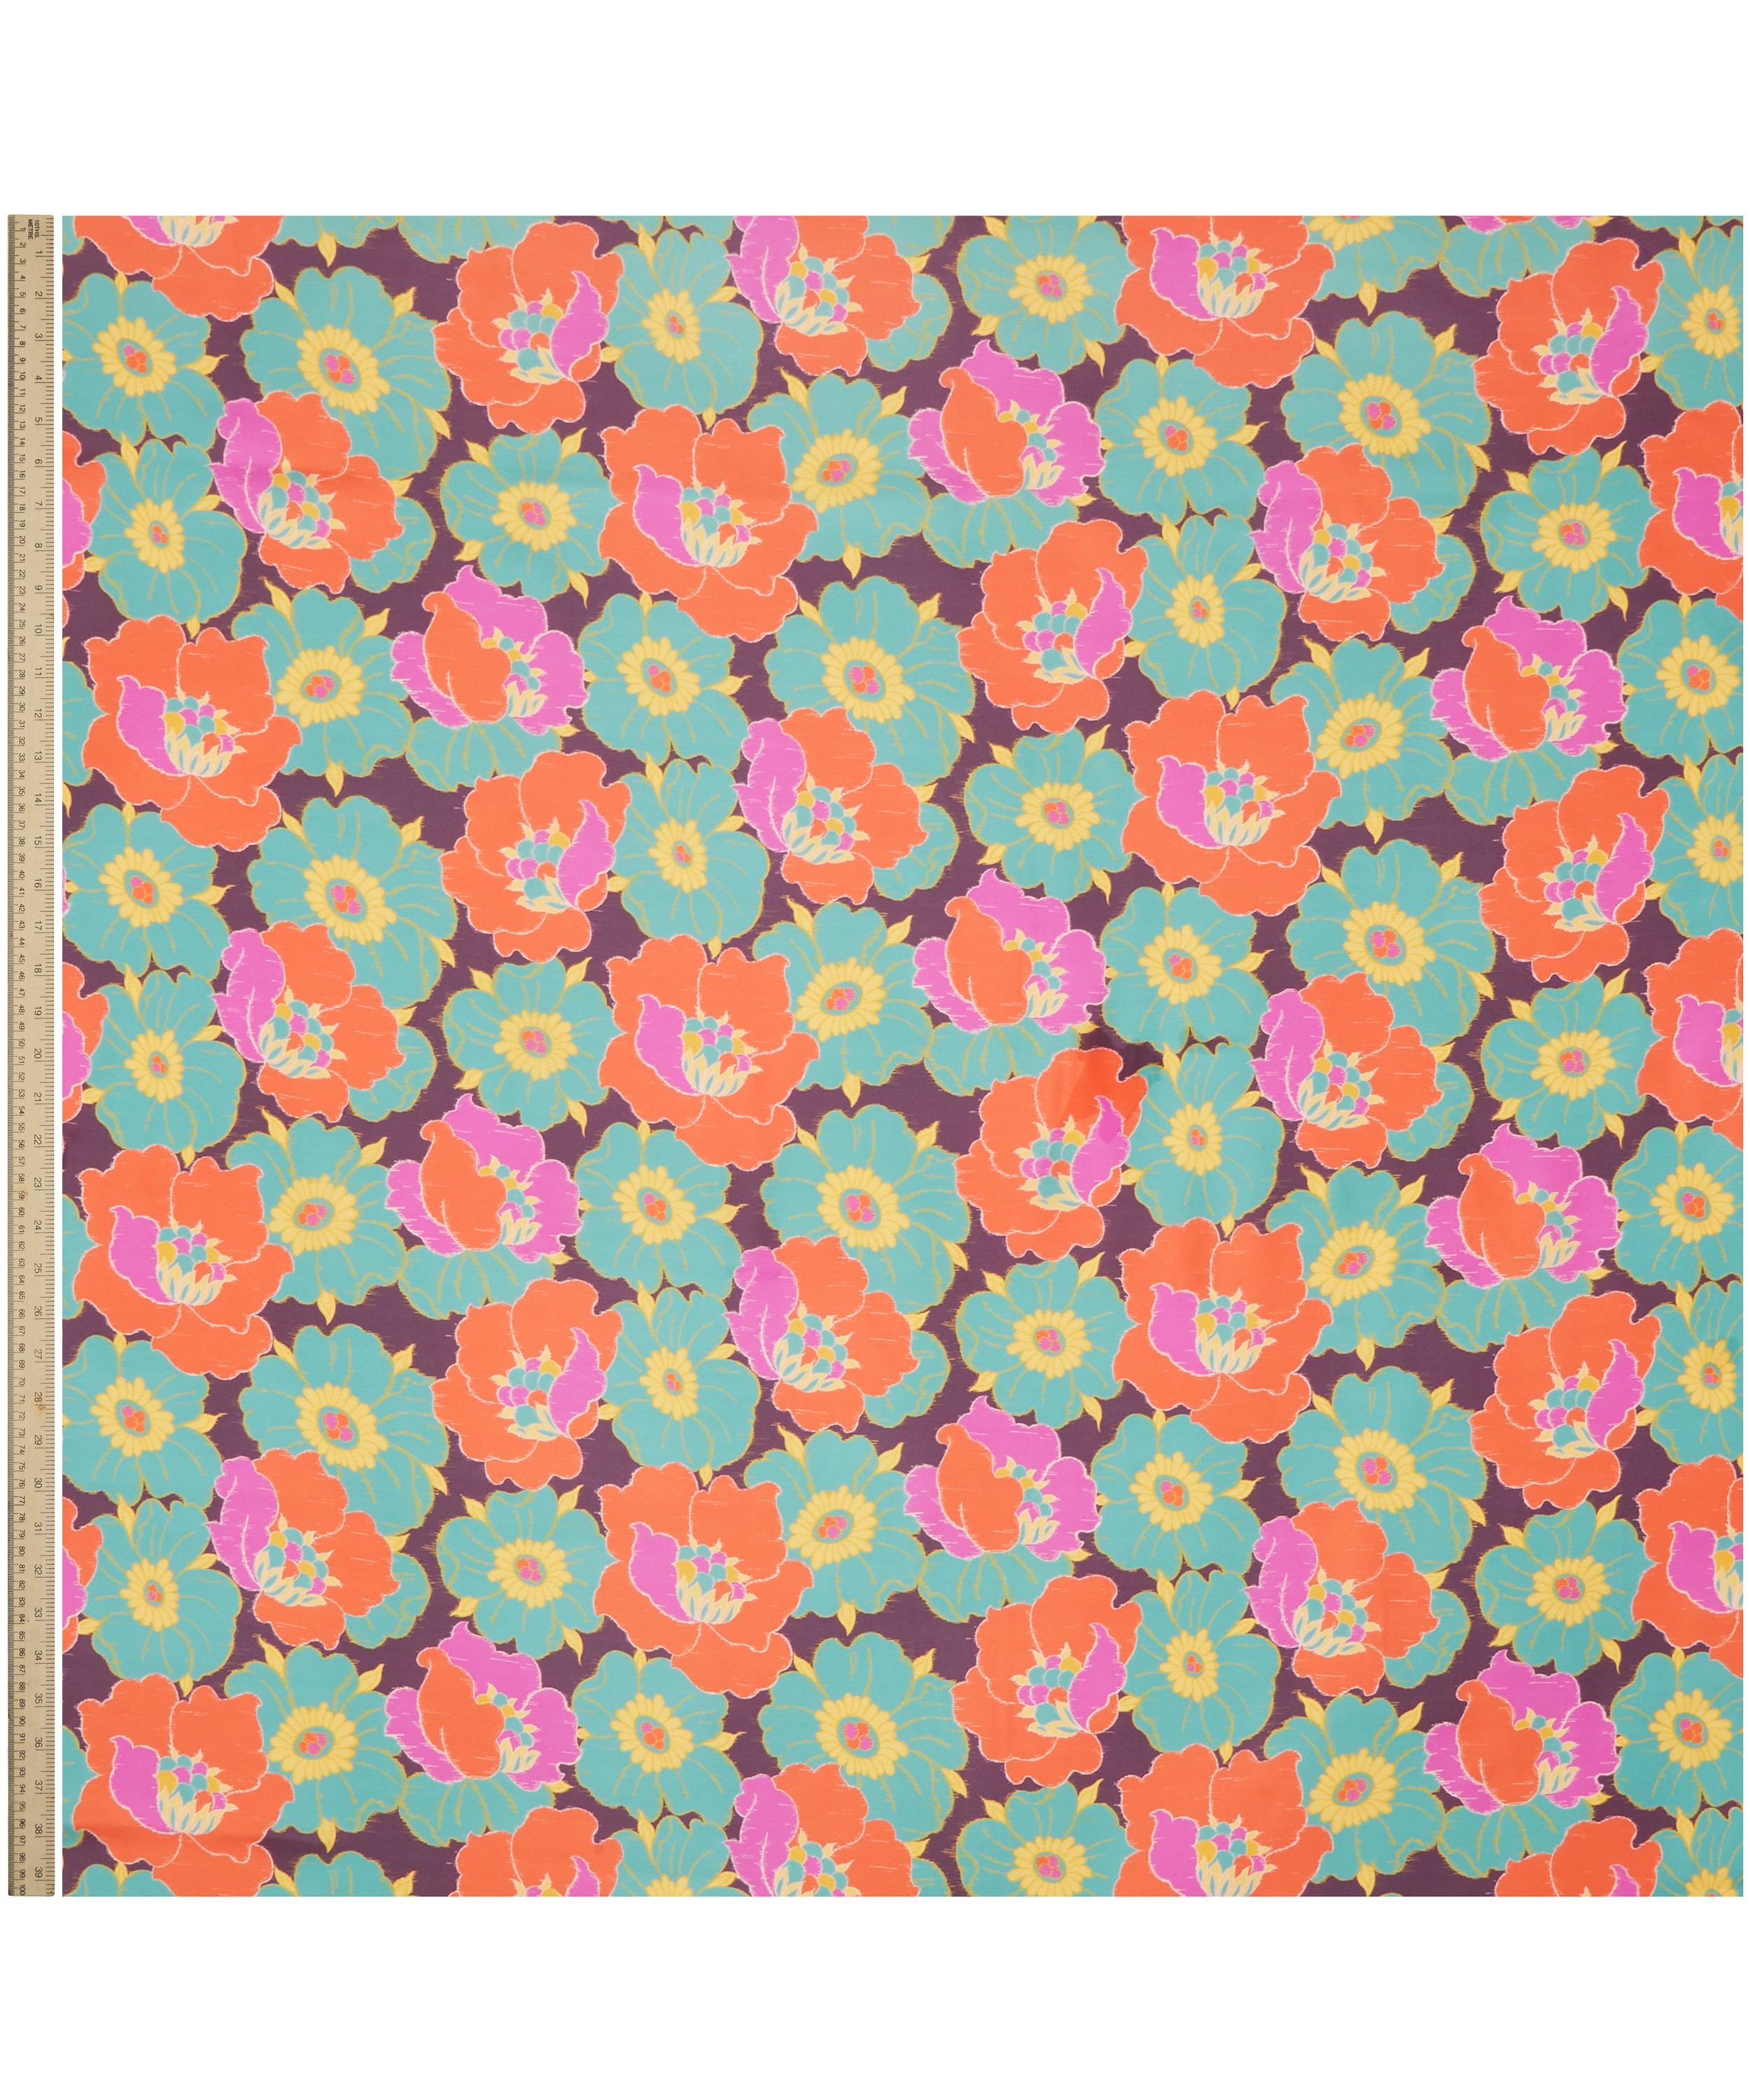 Daily Love, Large Silk Twill Scarf: Bright Pink, Blue and Yellow.